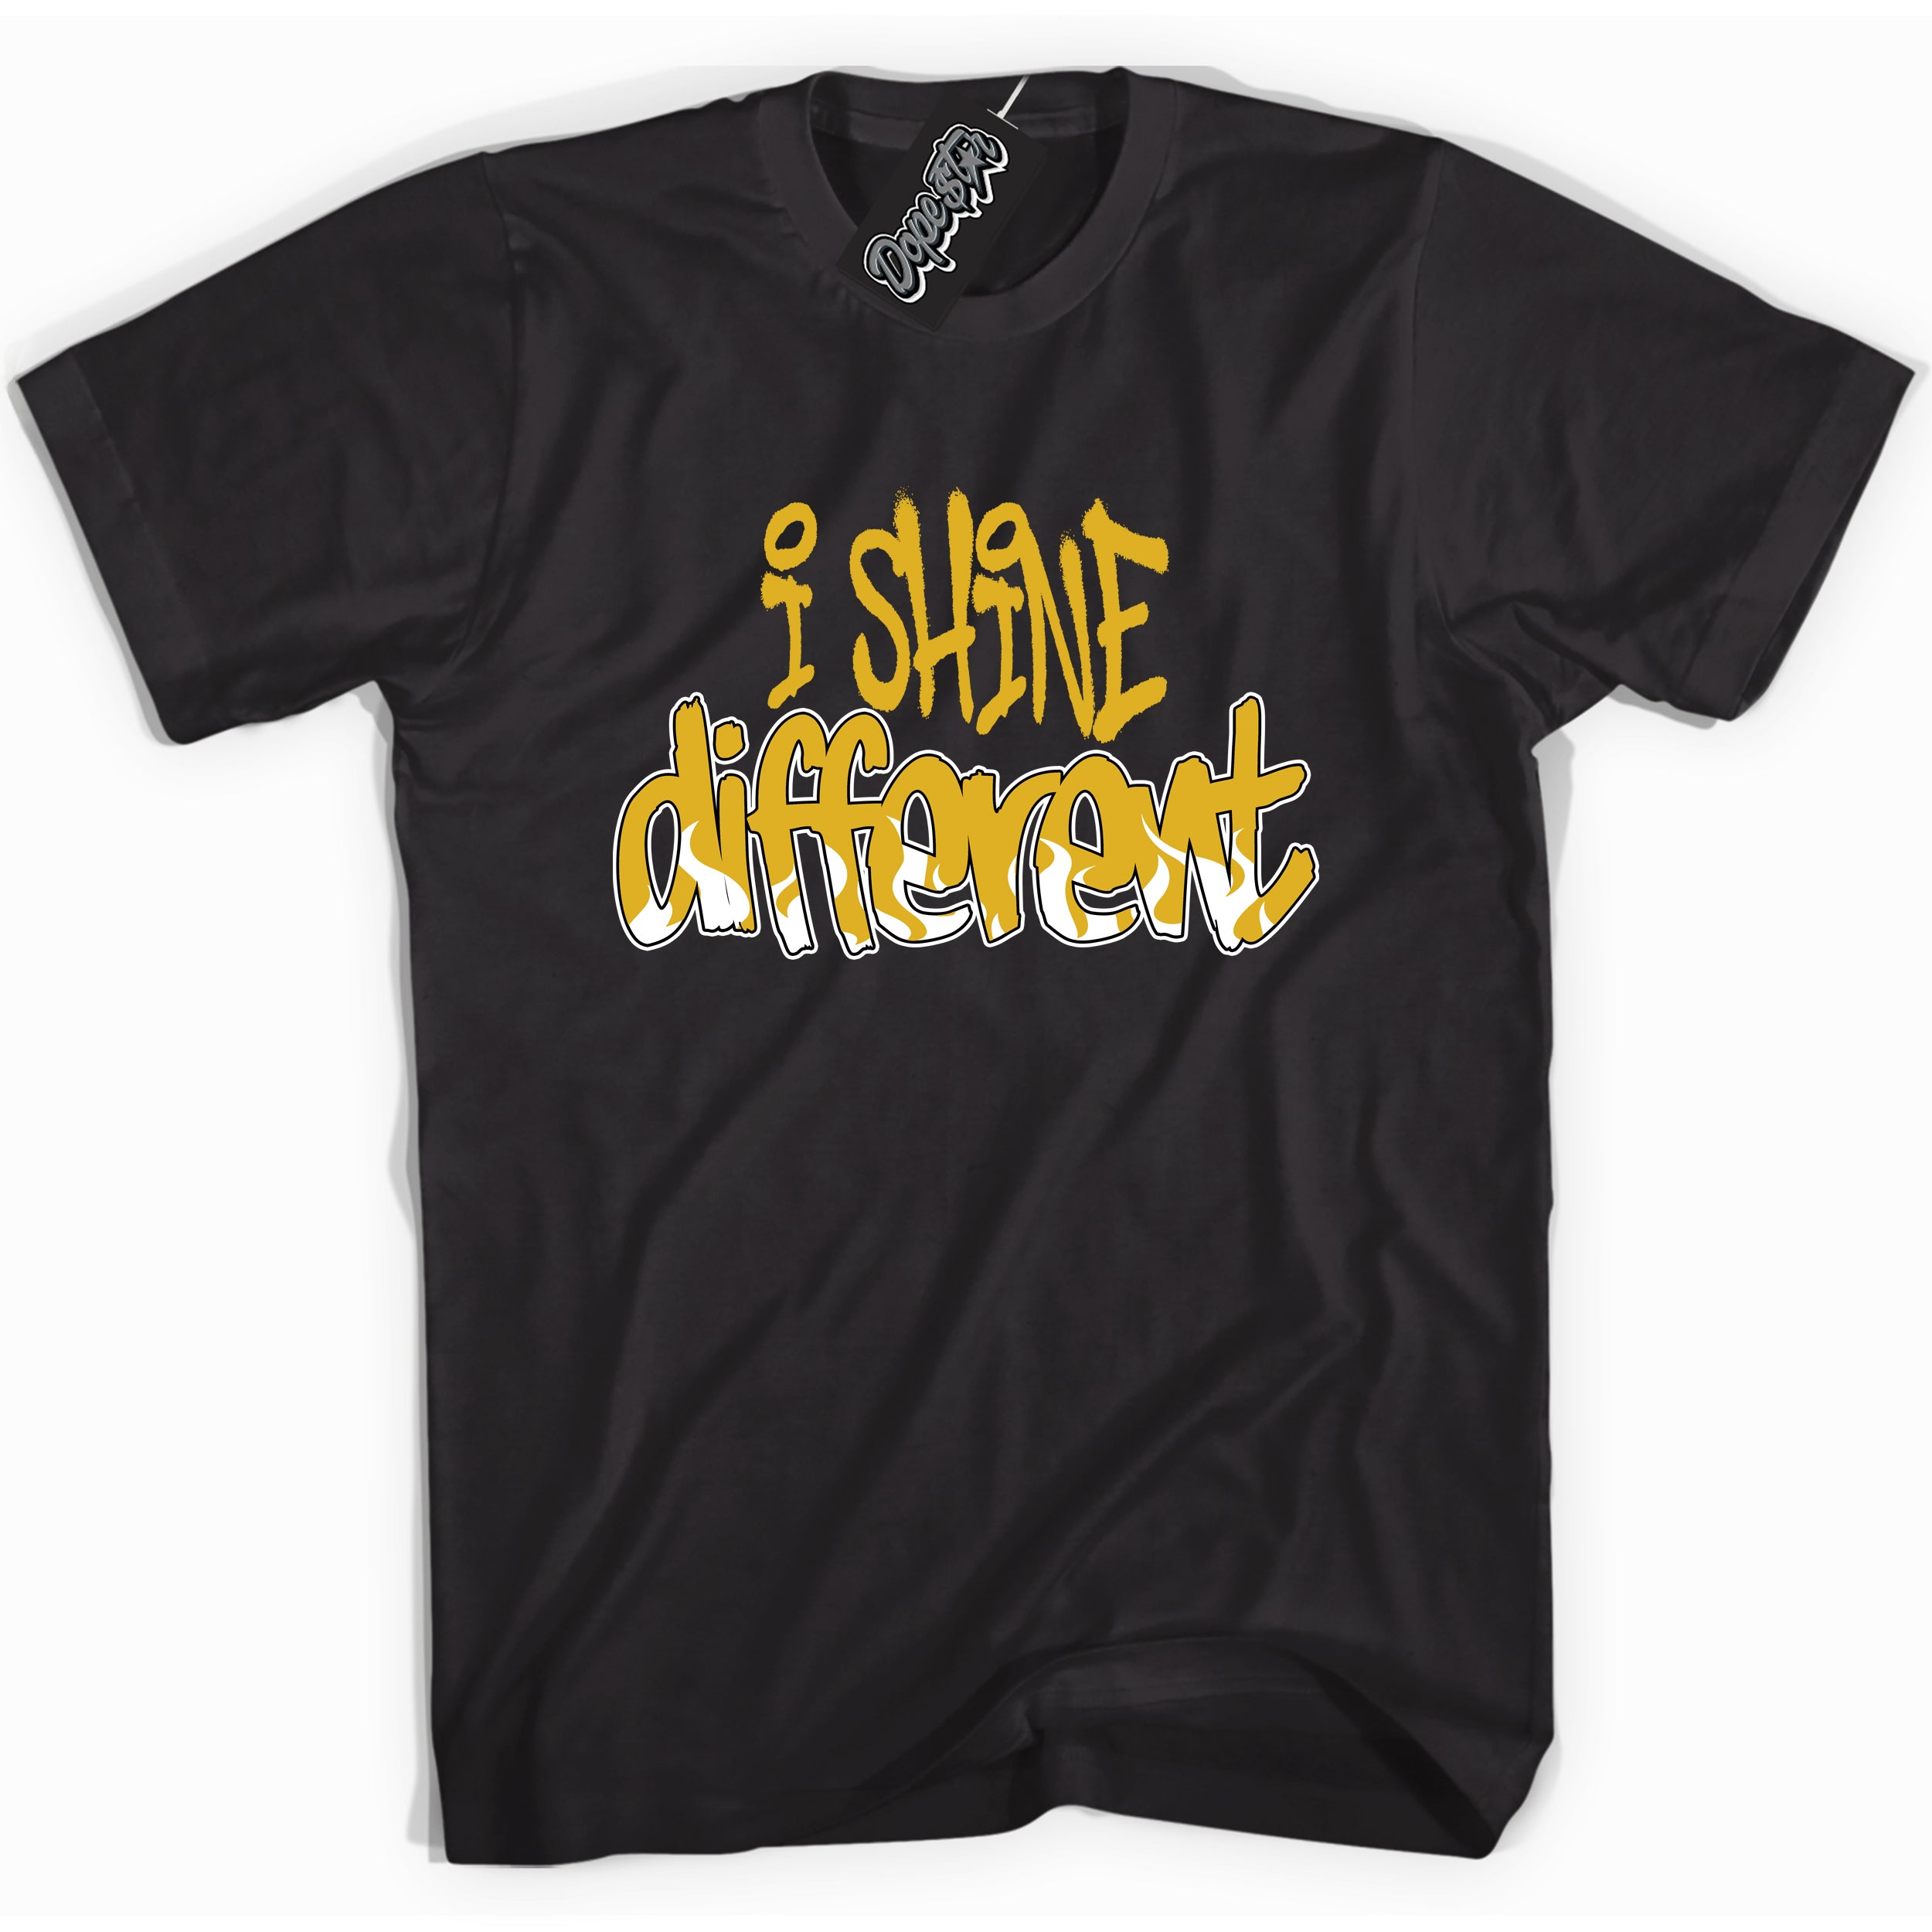 Cool Black Shirt with “ I Shine Different ” design that perfectly matches Yellow Ochre 6s Sneakers.